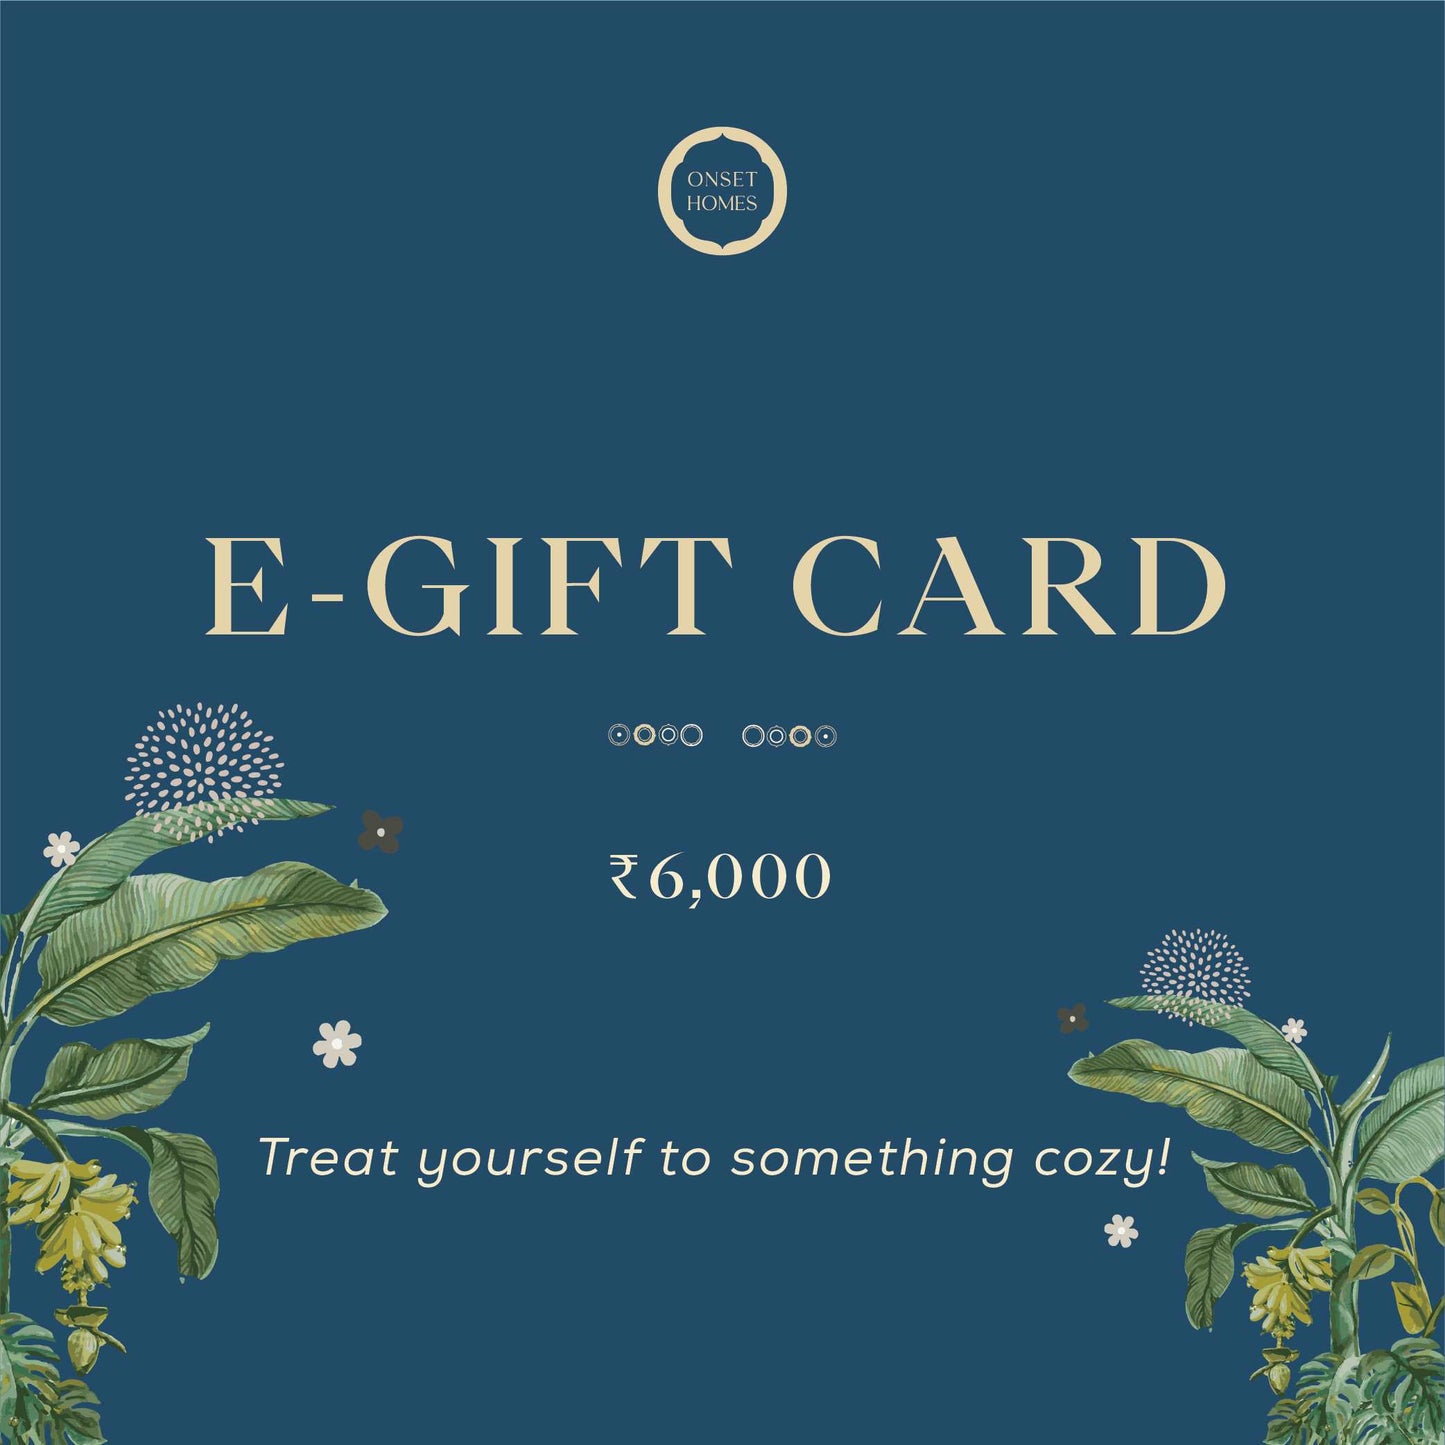 Onset Homes Gift Card